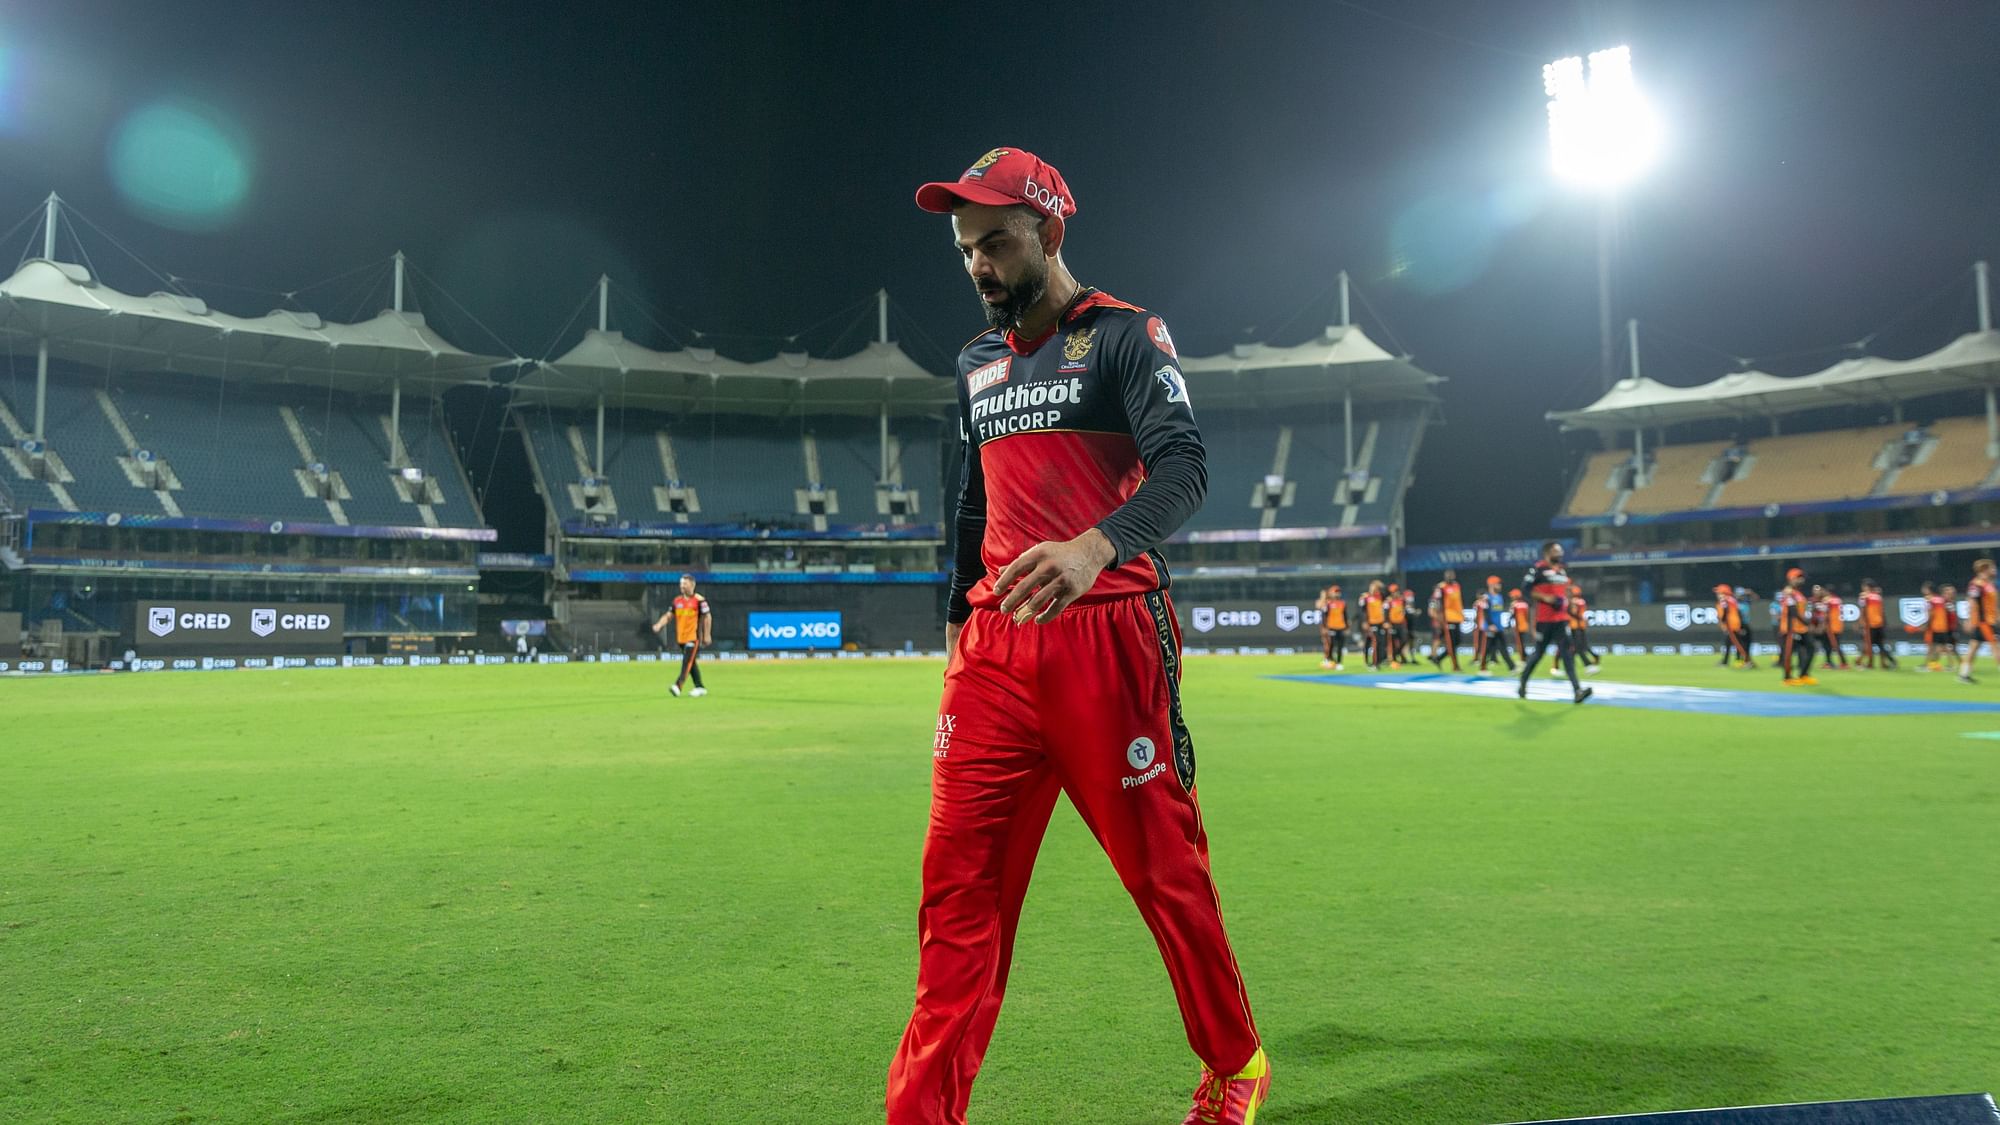 Royal Challengers Bangalore (RCB) captain Virat Kohli has been reprimanded for breaching the Indian Premier League’s (IPL) Code of Conduct.